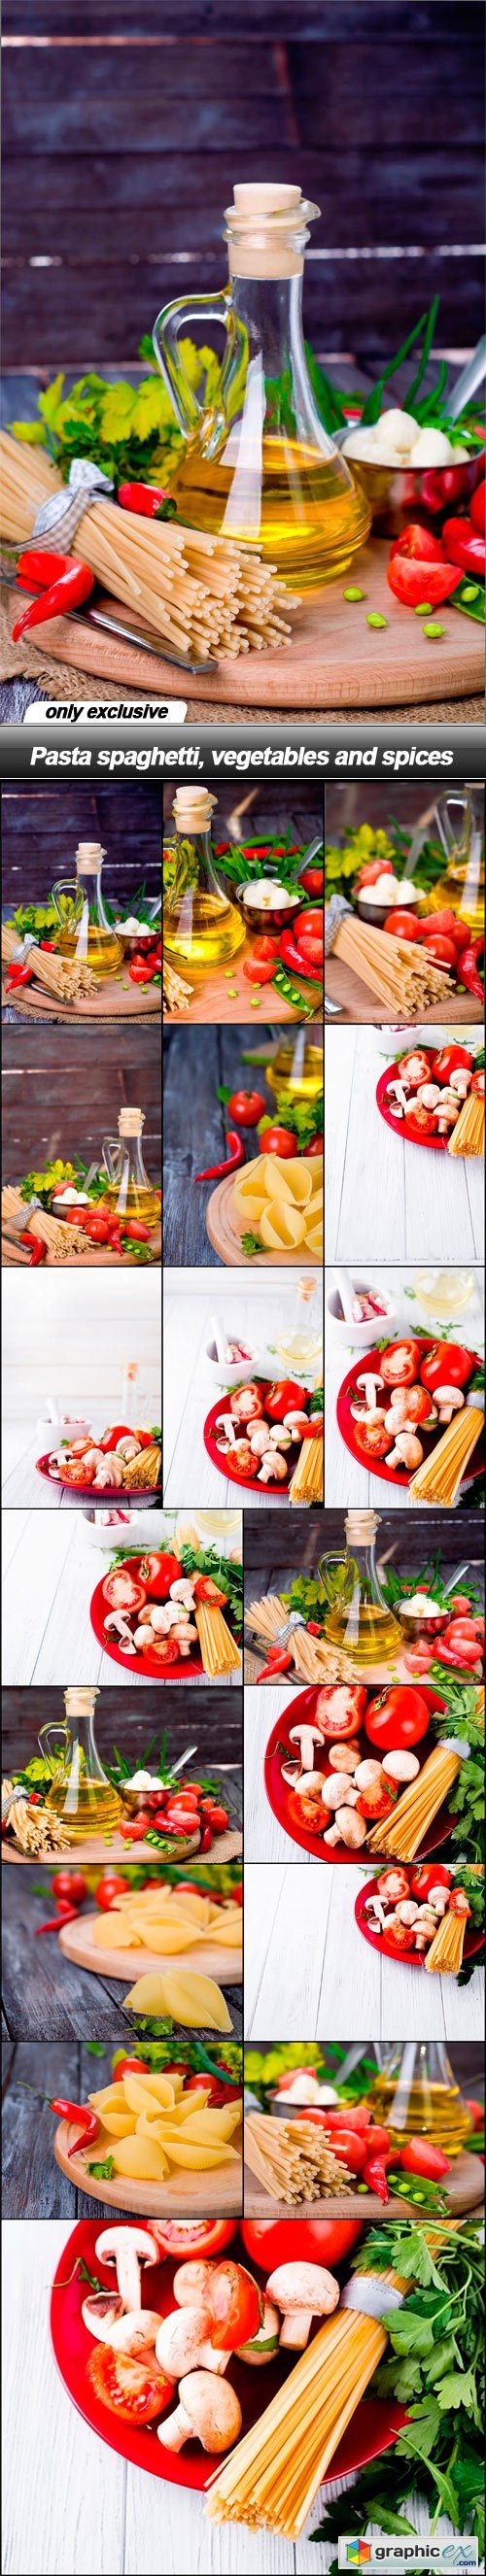 Pasta spaghetti, vegetables and spices - 18 UHQ JPEG